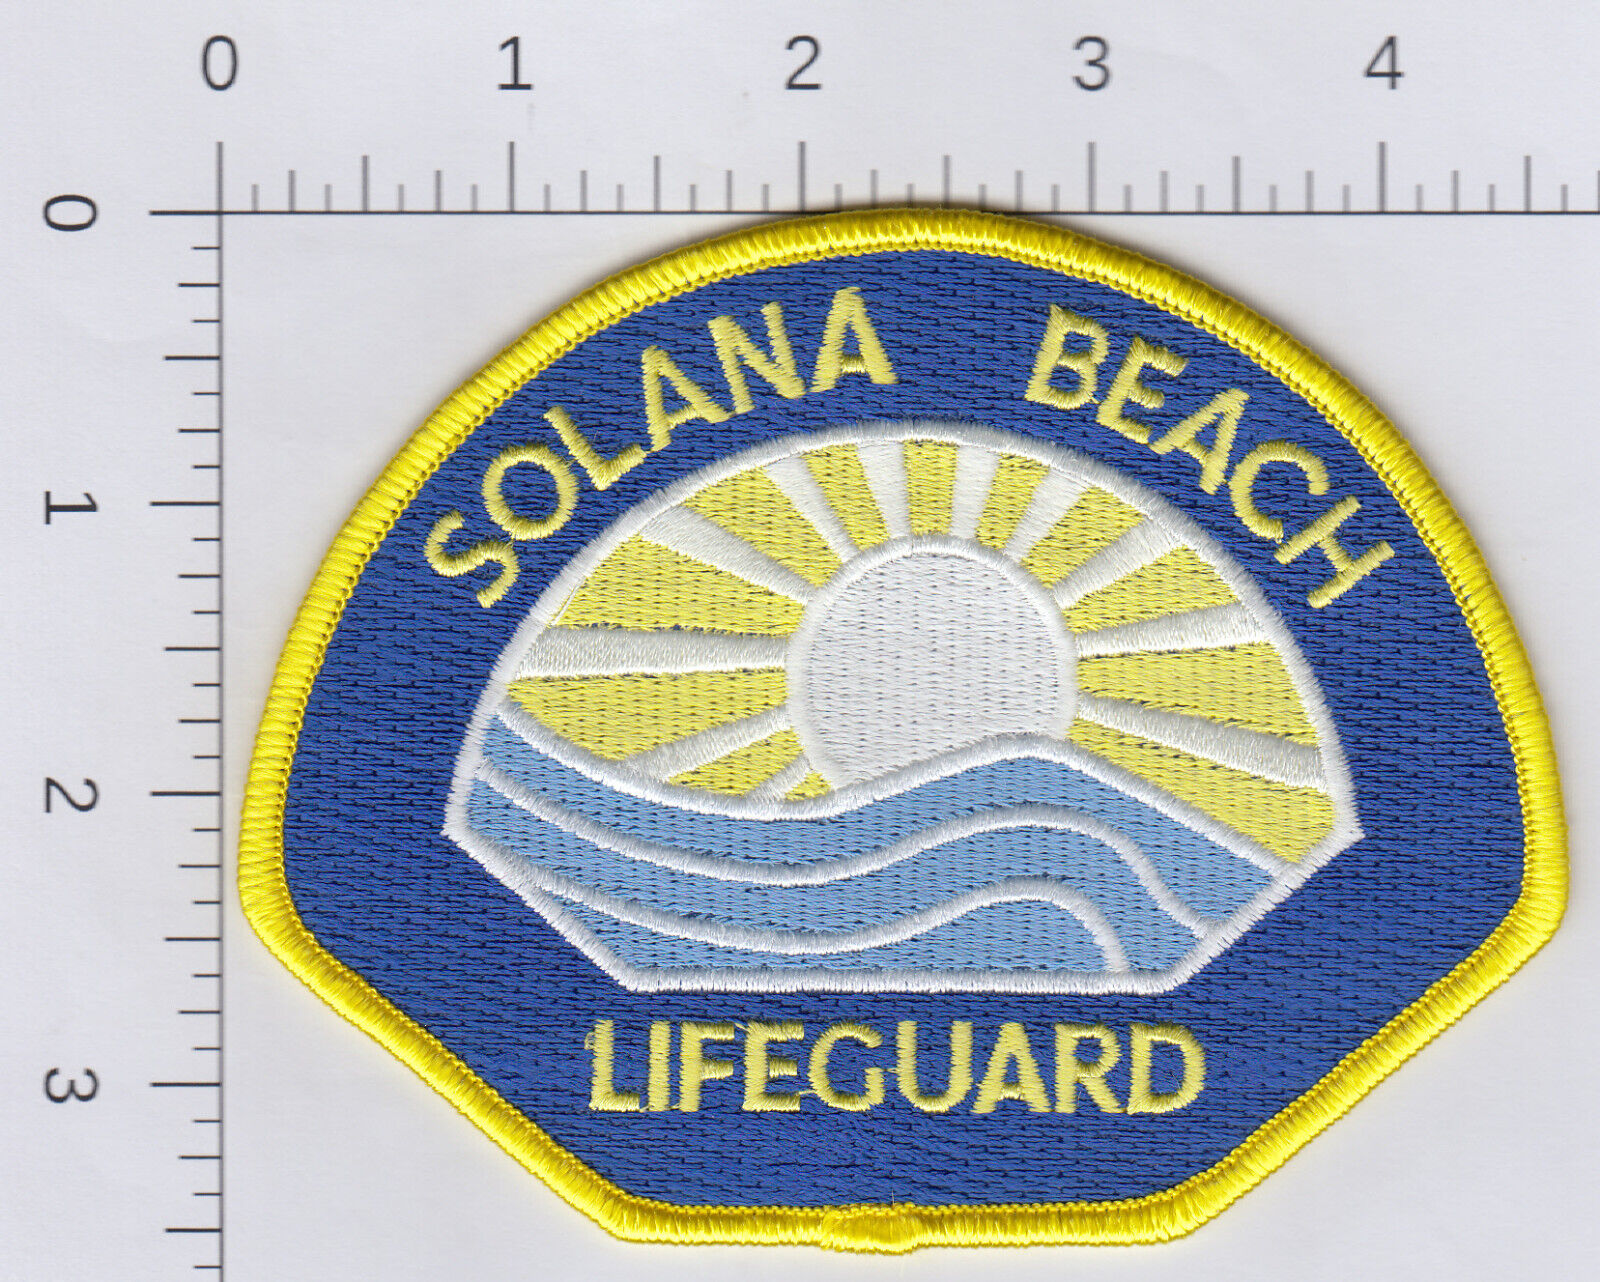 Solana Beach Lifeguard patch. See scan